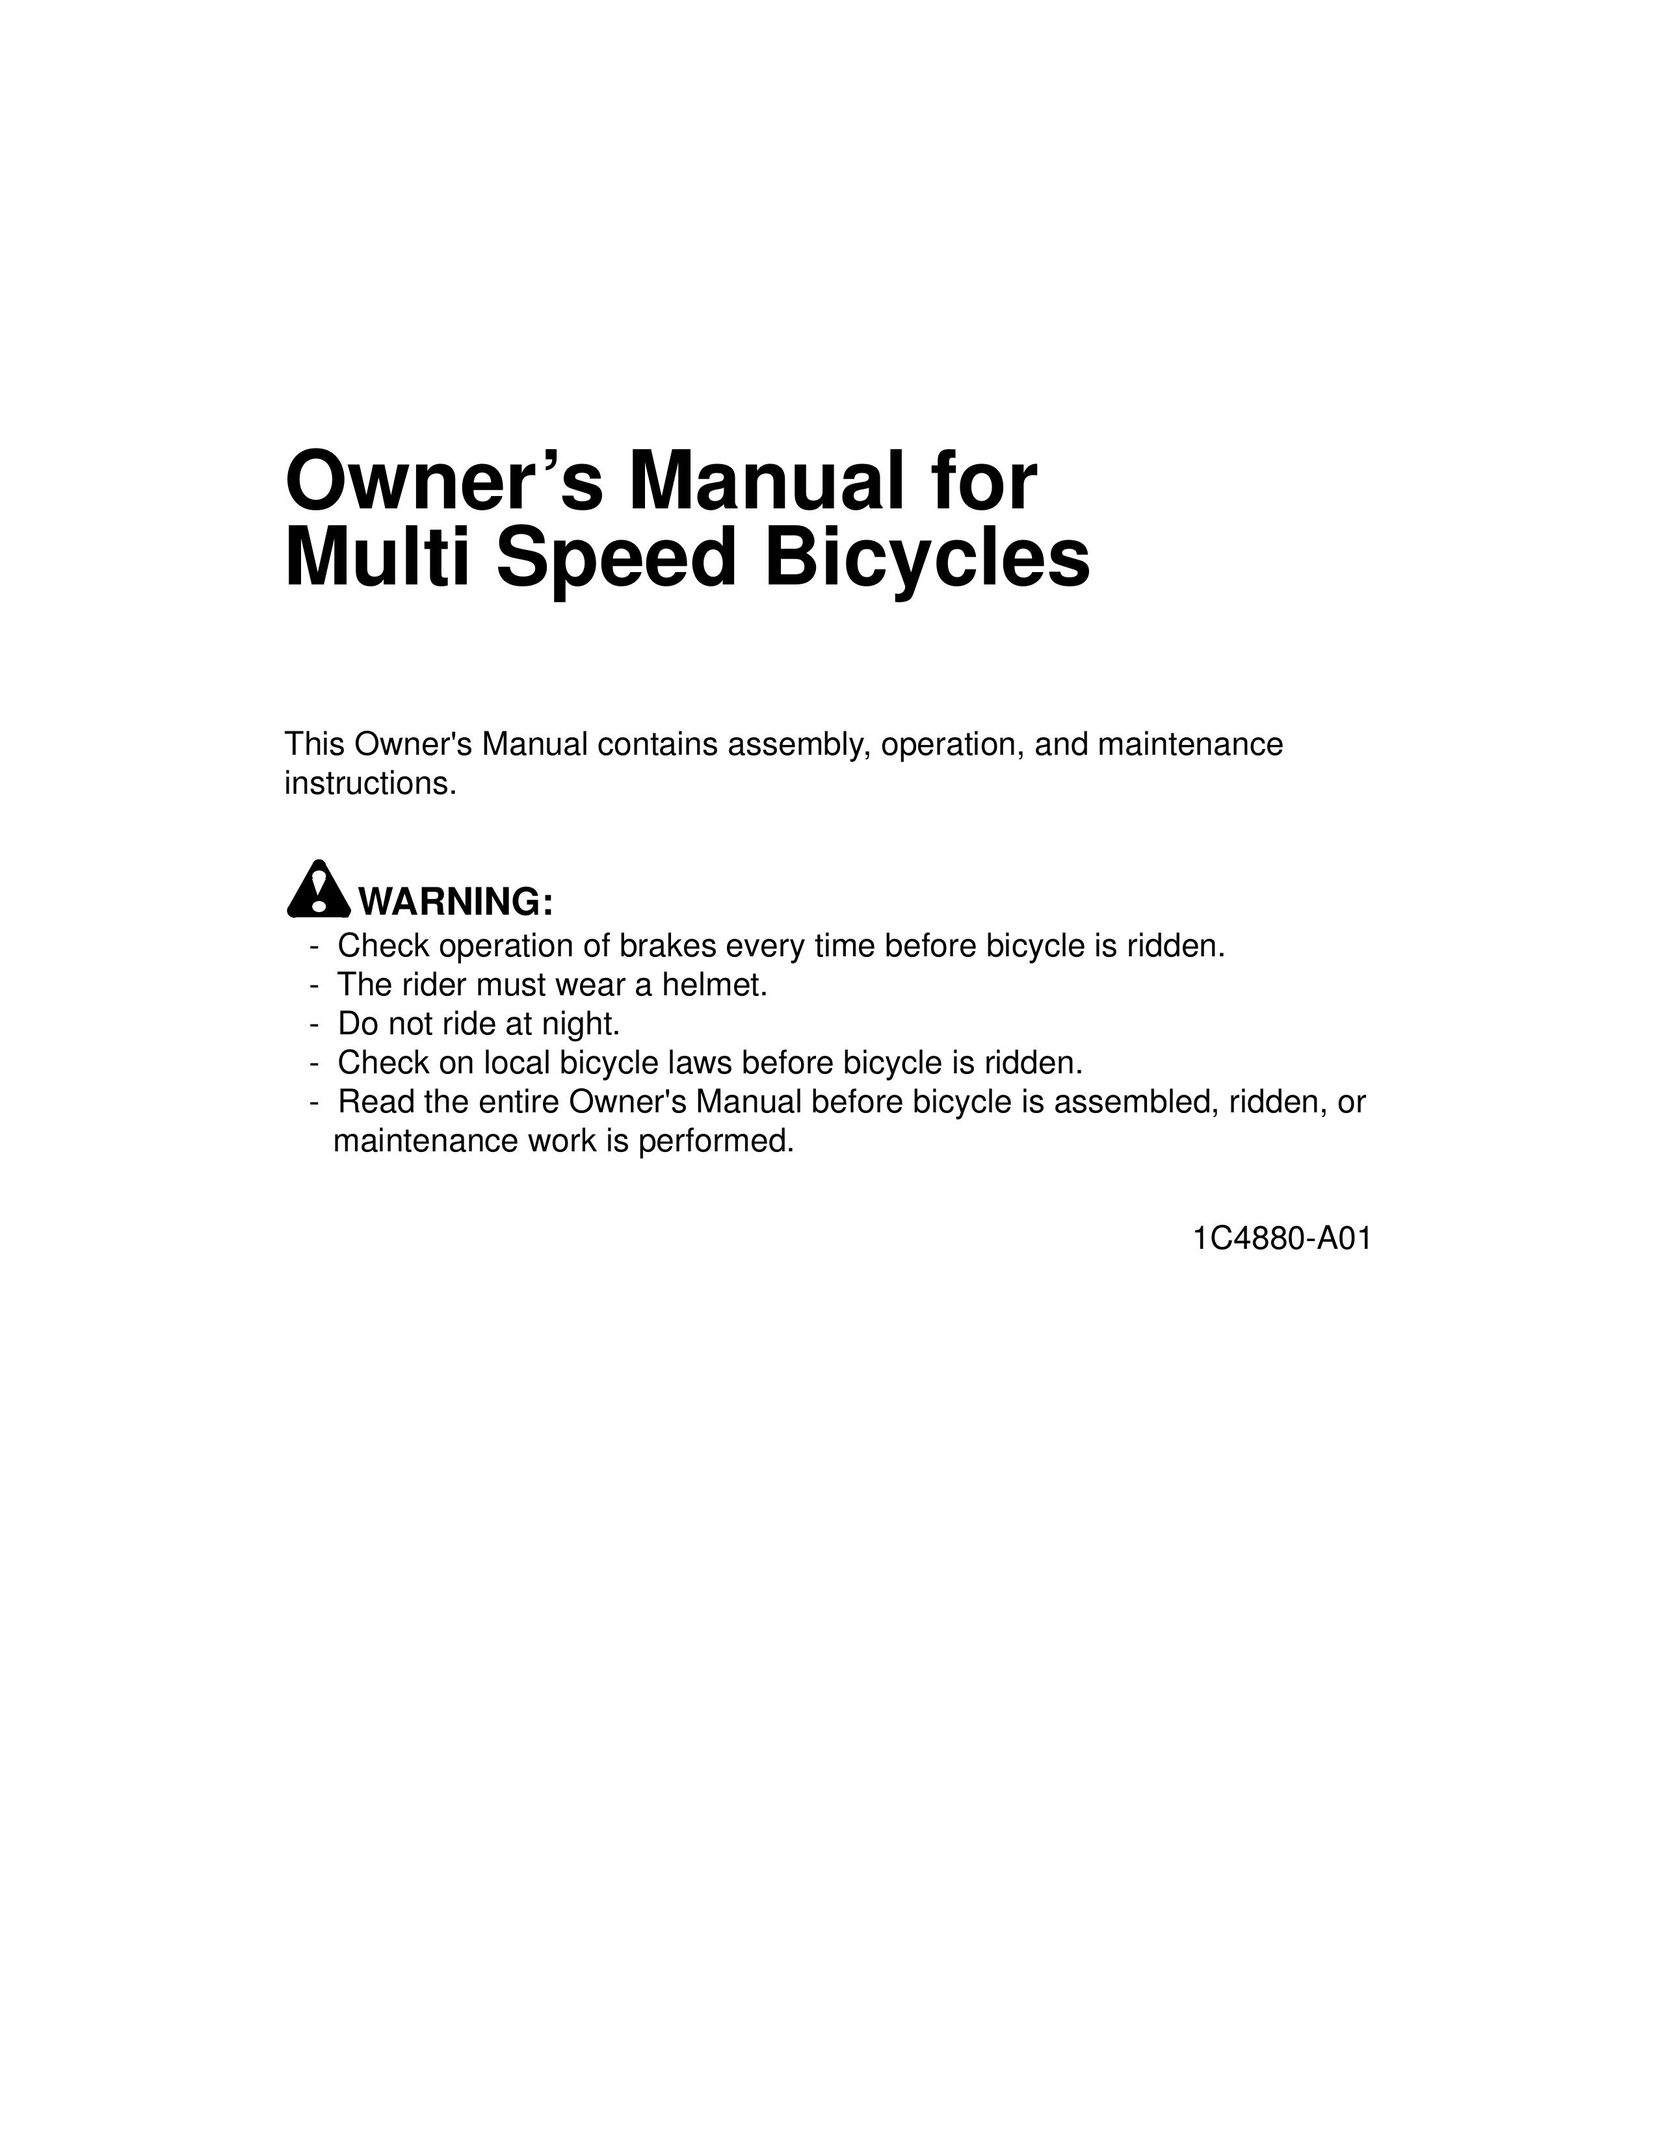 Huffy 1C4880-A01 Bicycle User Manual